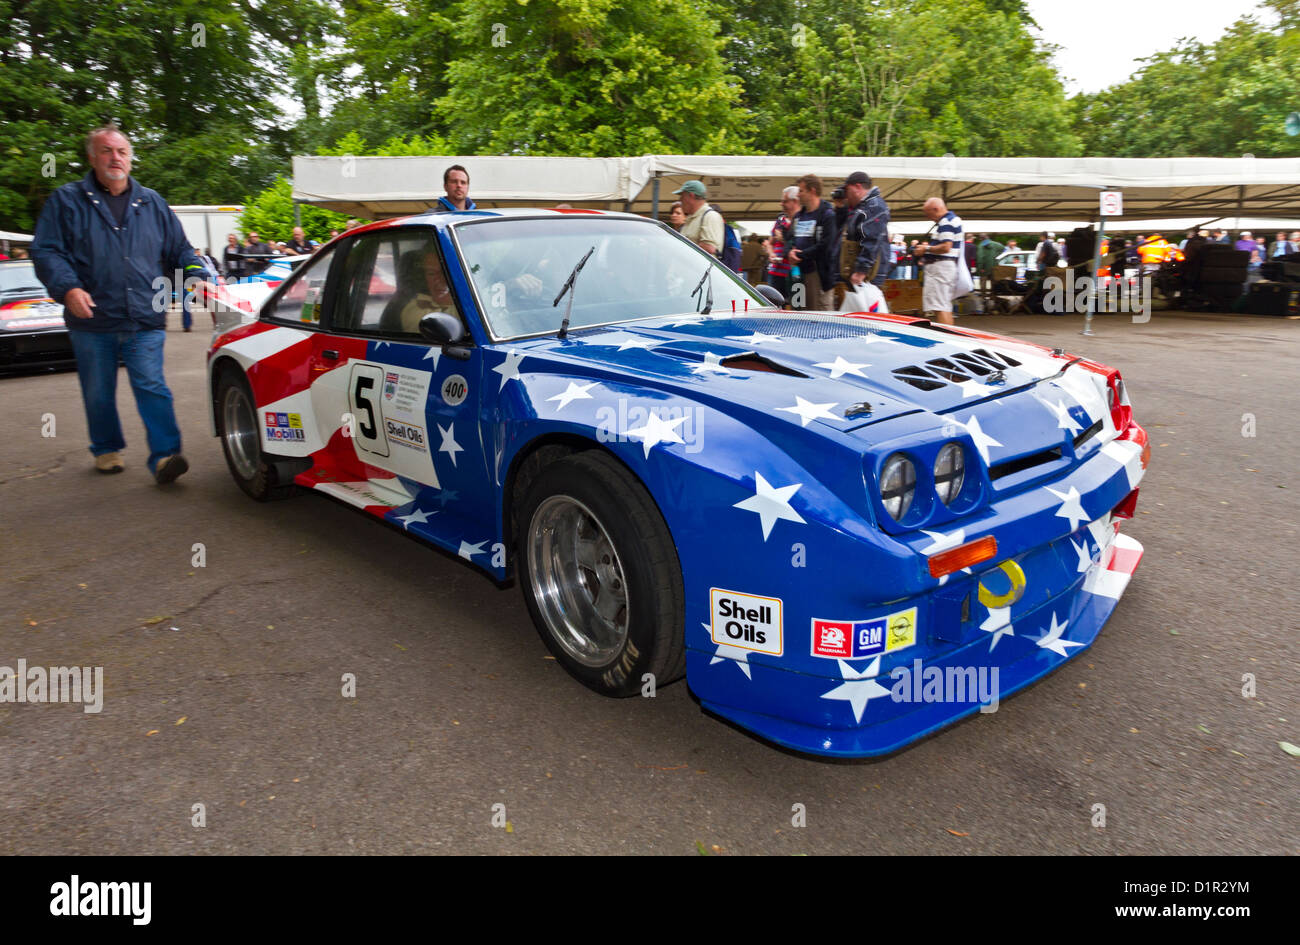 1986 Opel Manta 400 « Stars & Stripes' quitte le paddock au Goodwood Festival of Speed 2012, Sussex, UK. Banque D'Images